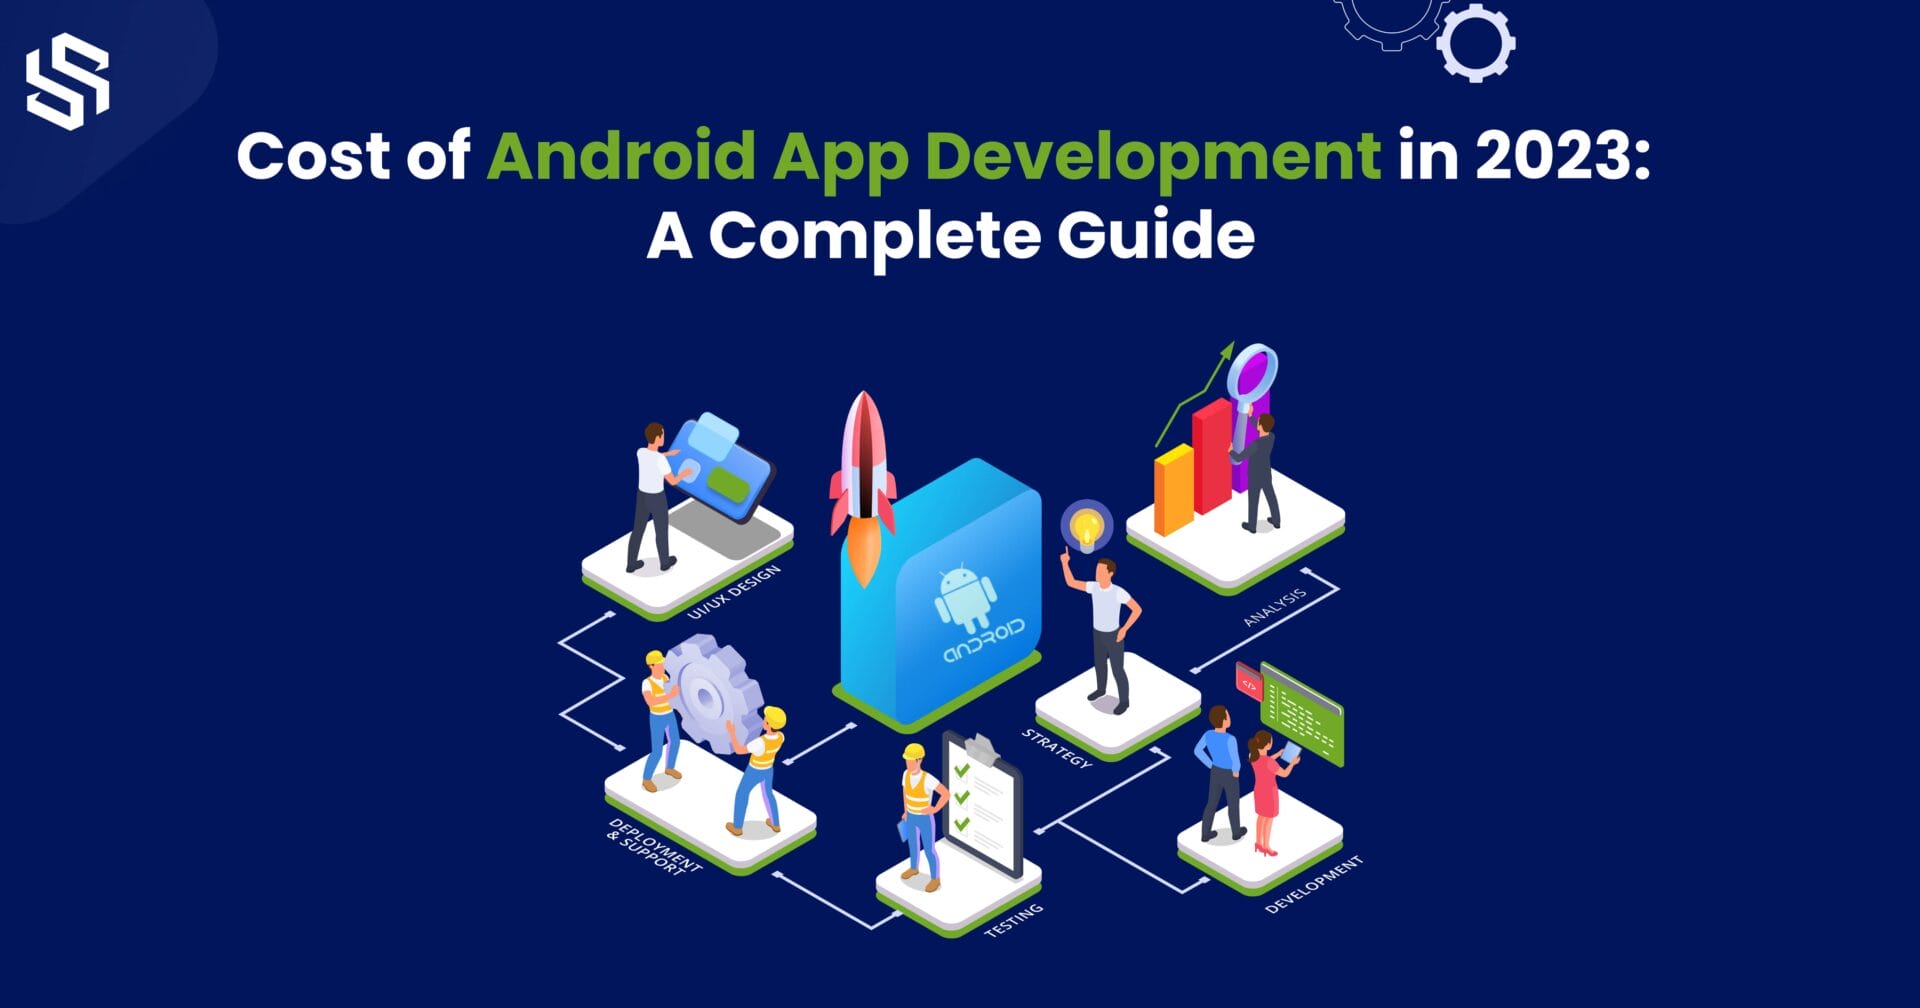 Cost of Android App Development in 2023